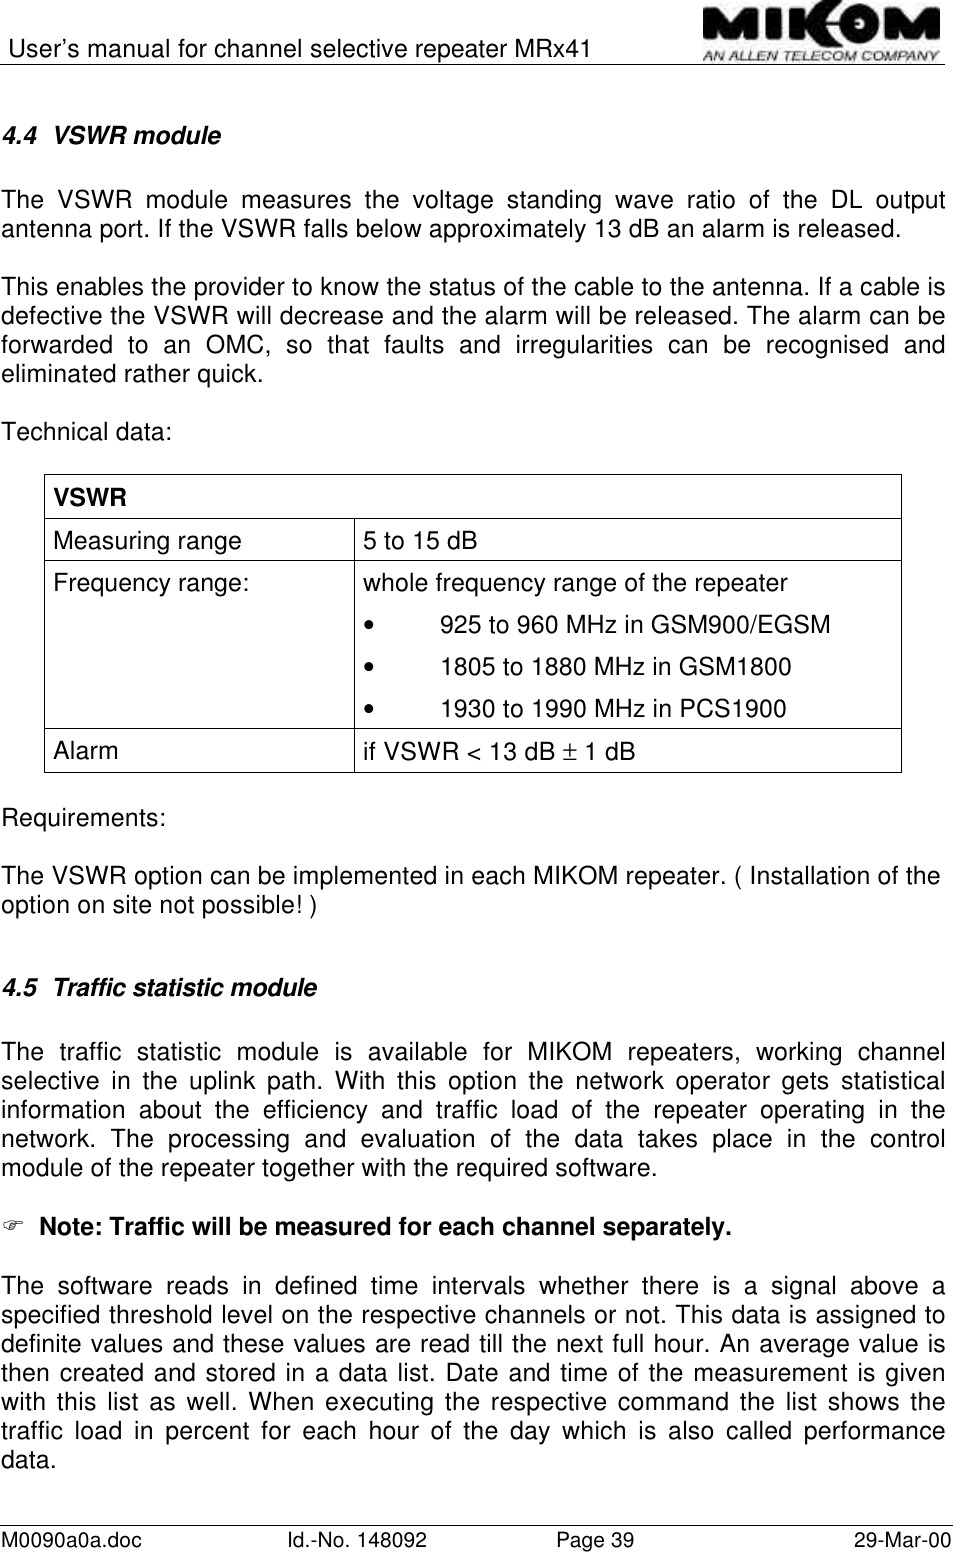 User’s manual for channel selective repeater MRx41M0090a0a.doc Id.-No. 148092 Page 39 29-Mar-004.4 VSWR moduleThe VSWR module measures the voltage standing wave ratio of the DL outputantenna port. If the VSWR falls below approximately 13 dB an alarm is released.This enables the provider to know the status of the cable to the antenna. If a cable isdefective the VSWR will decrease and the alarm will be released. The alarm can beforwarded to an OMC, so that faults and irregularities can be recognised andeliminated rather quick.Technical data:VSWRMeasuring range 5 to 15 dBFrequency range: whole frequency range of the repeater• 925 to 960 MHz in GSM900/EGSM• 1805 to 1880 MHz in GSM1800• 1930 to 1990 MHz in PCS1900Alarm if VSWR &lt; 13 dB ± 1 dBRequirements:The VSWR option can be implemented in each MIKOM repeater. ( Installation of theoption on site not possible! )4.5 Traffic statistic moduleThe traffic statistic module is available for MIKOM repeaters, working channelselective in the uplink path. With this option the network operator gets statisticalinformation about the efficiency and traffic load of the repeater operating in thenetwork. The processing and evaluation of the data takes place in the controlmodule of the repeater together with the required software.F  Note: Traffic will be measured for each channel separately.The software reads in defined time intervals whether there is a signal above aspecified threshold level on the respective channels or not. This data is assigned todefinite values and these values are read till the next full hour. An average value isthen created and stored in a data list. Date and time of the measurement is givenwith this list as well. When executing the respective command the list shows thetraffic load in percent for each hour of the day which is also called performancedata.